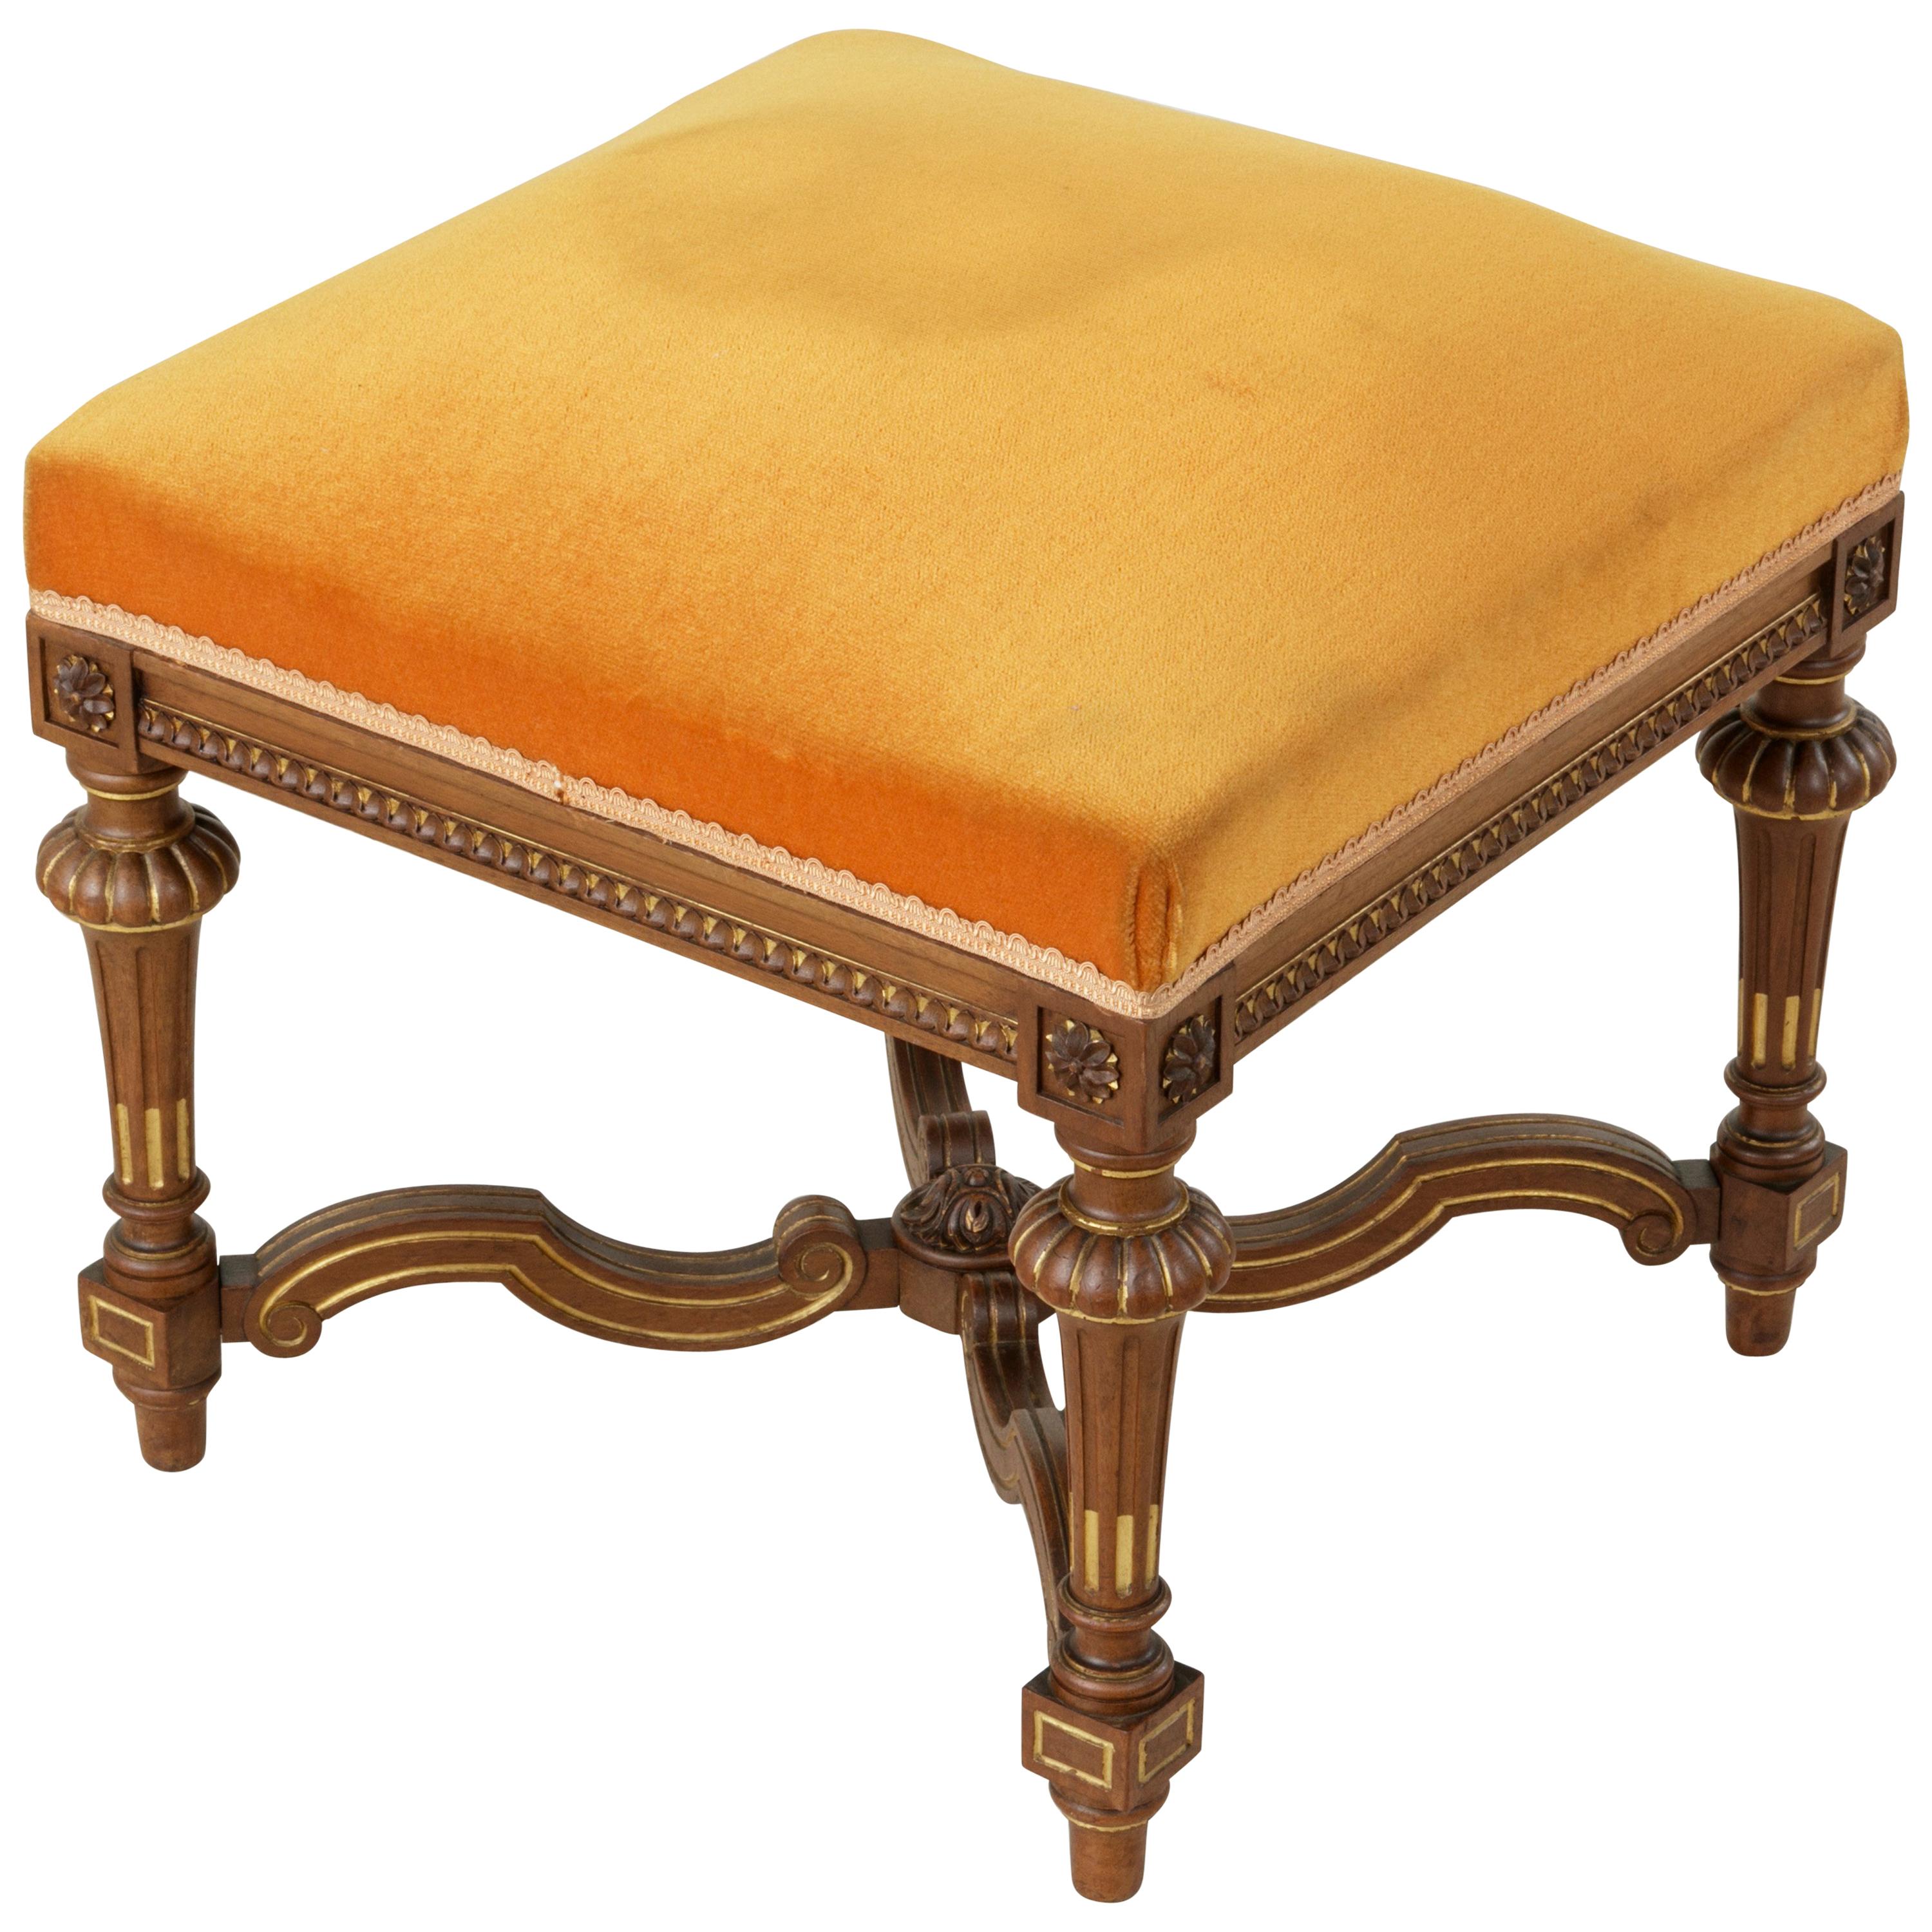 French Louis XIV Style Walnut Banquette, Stool, or Ottoman, circa 1900